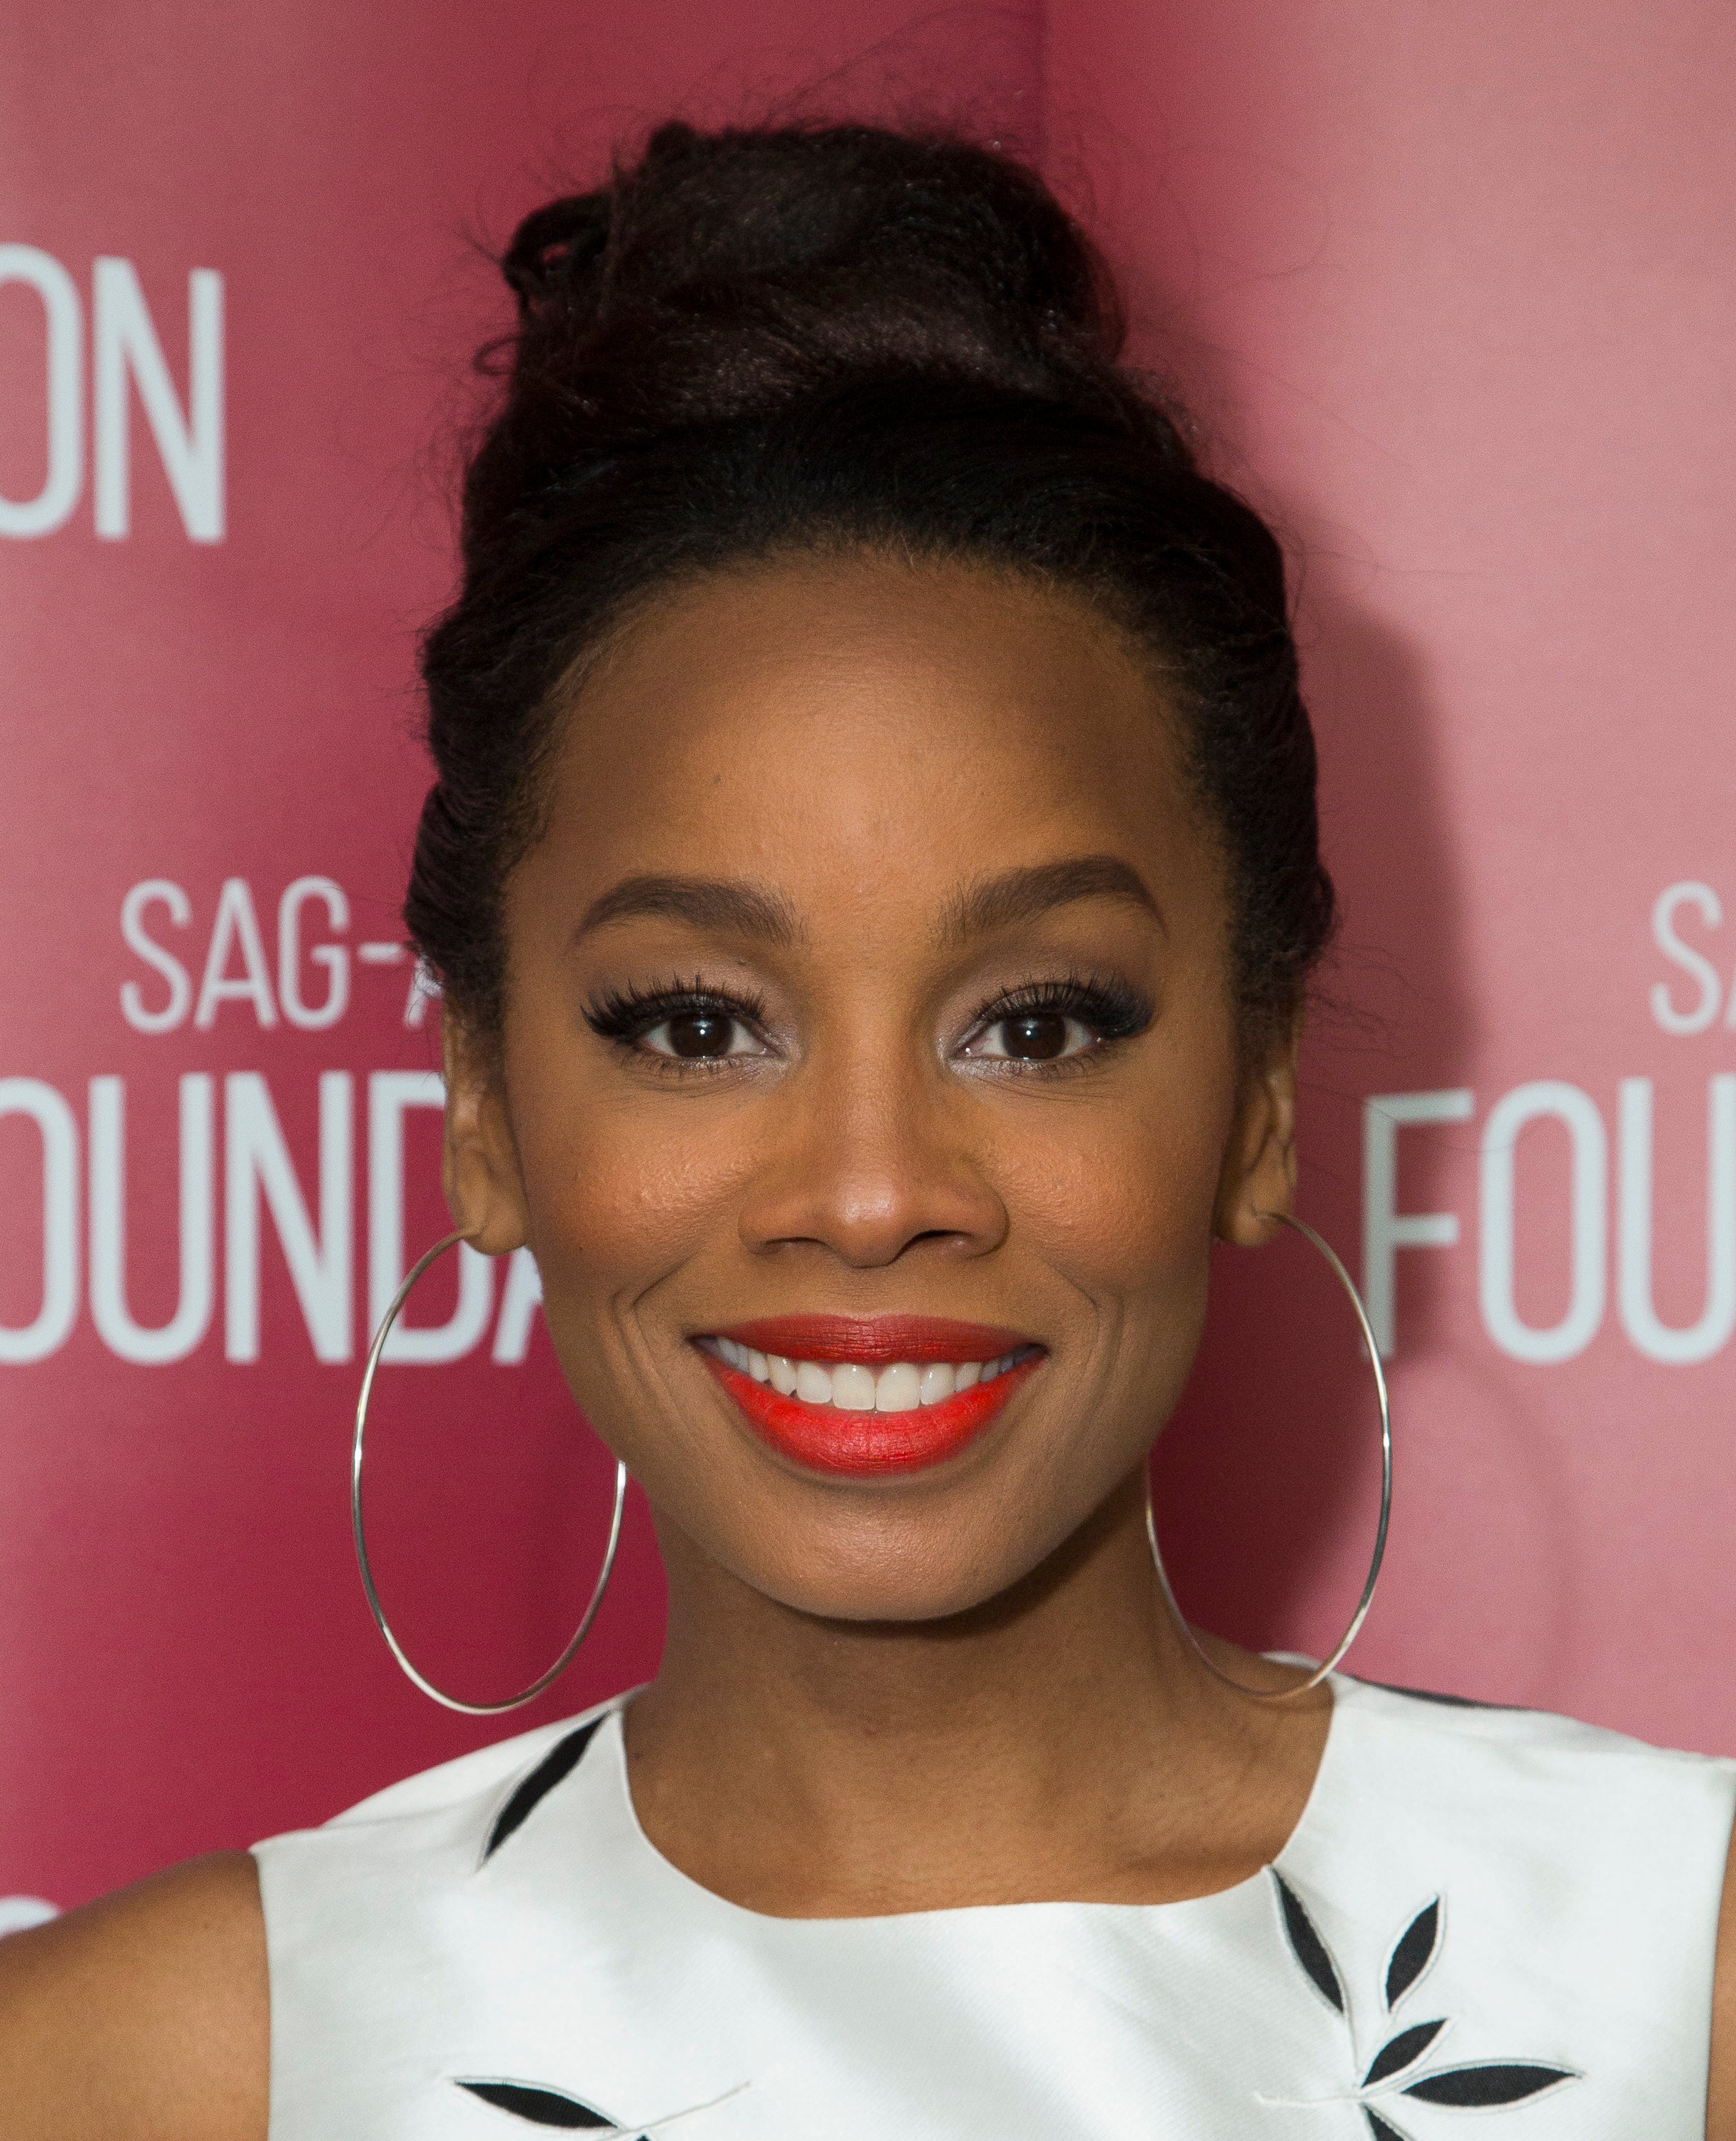 Anika Noni Rose Nailed This Perfect Summer Look—Here's How You Can Too!
